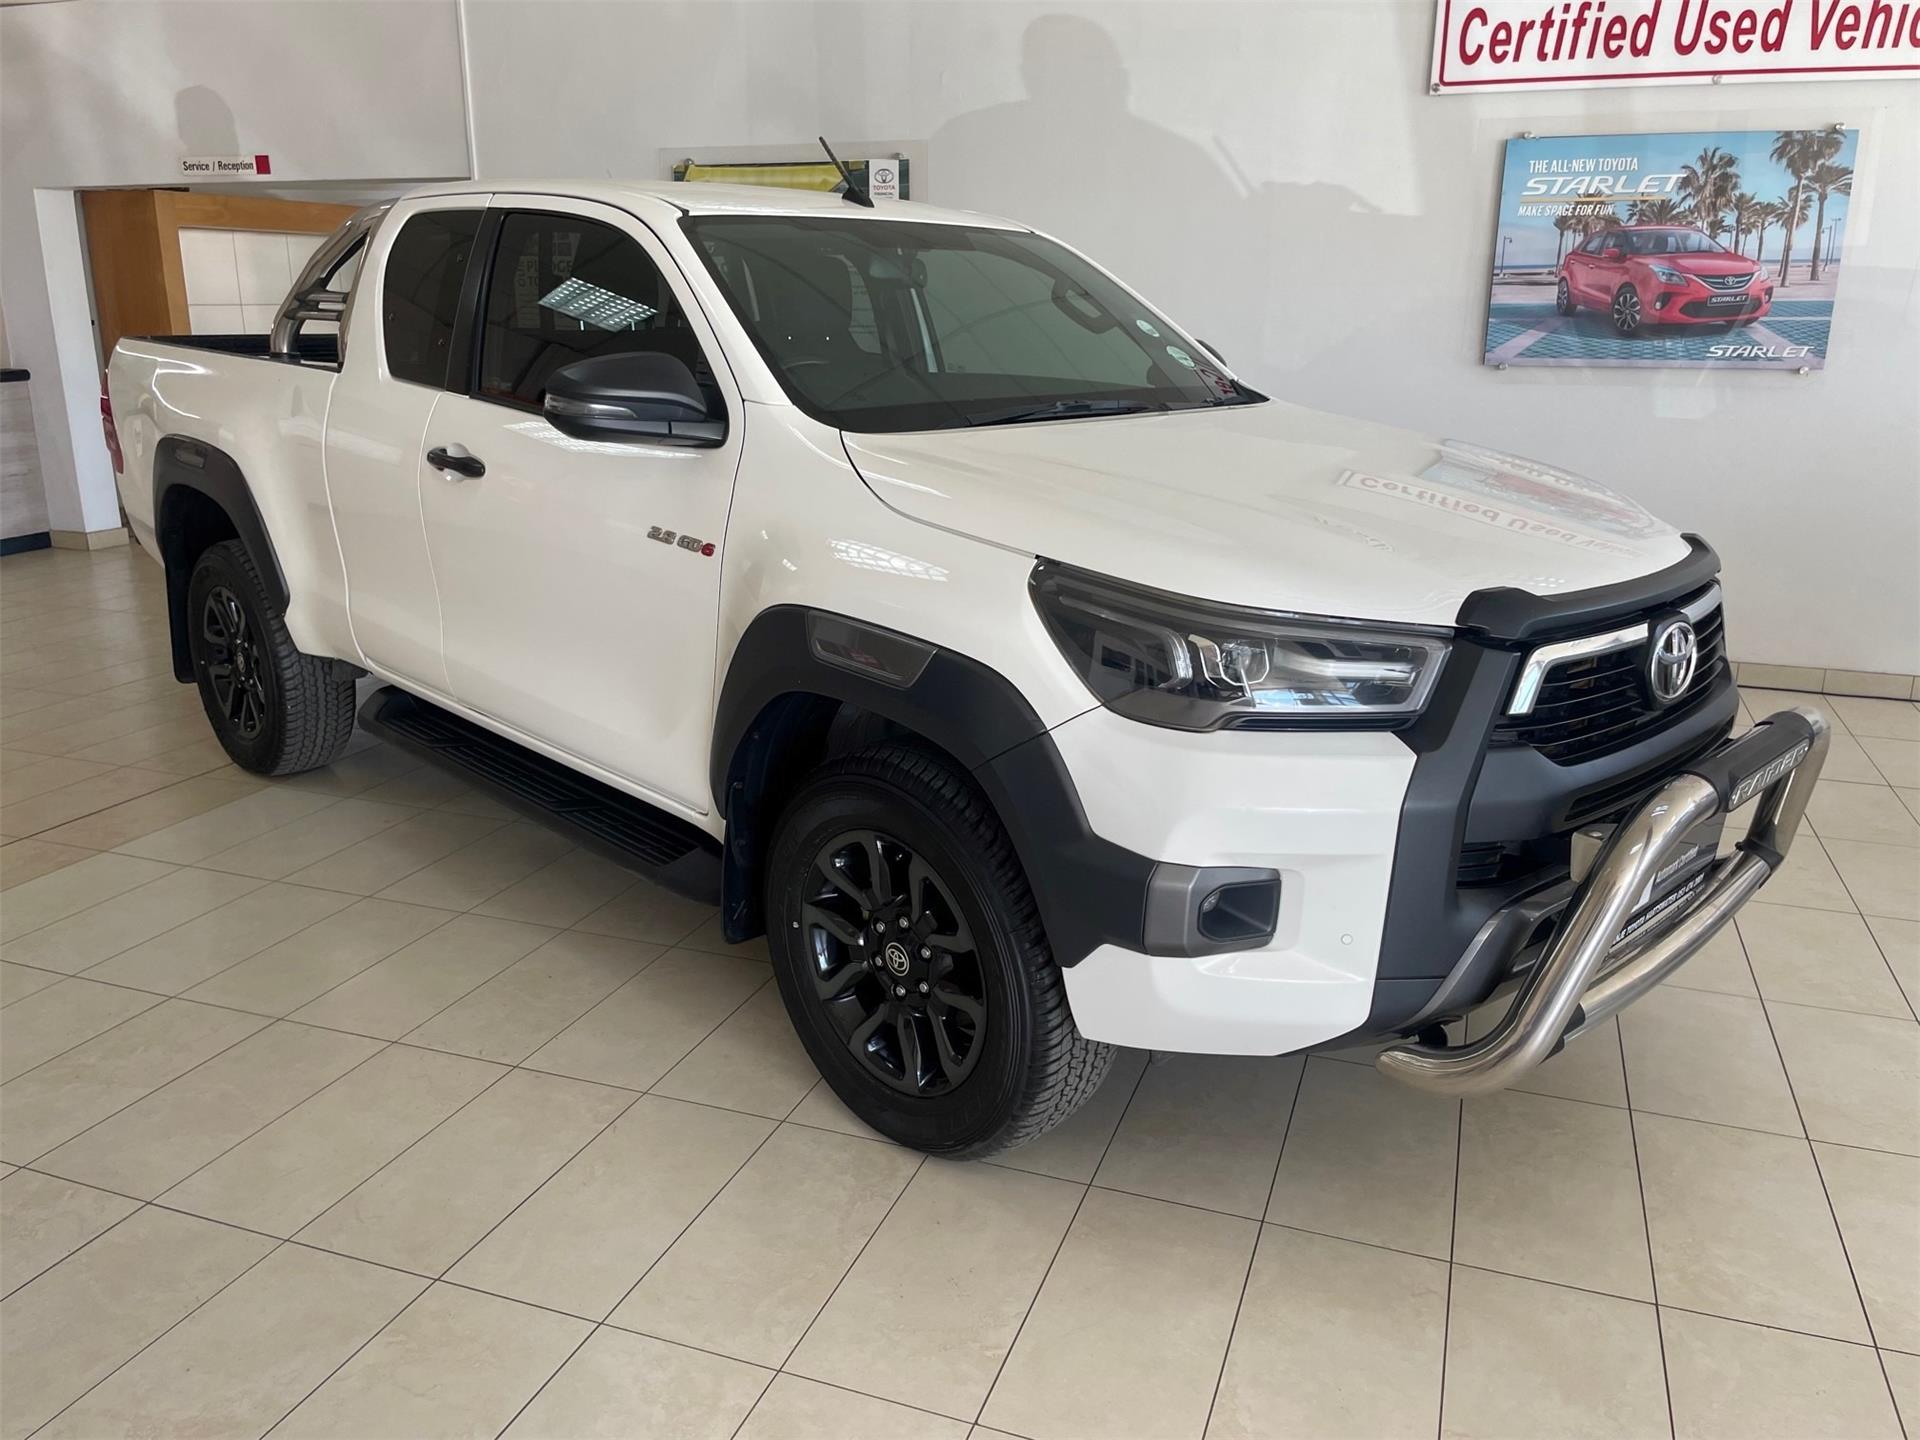 2021 Toyota Hilux Xtra Cab  for sale - 1040448/1